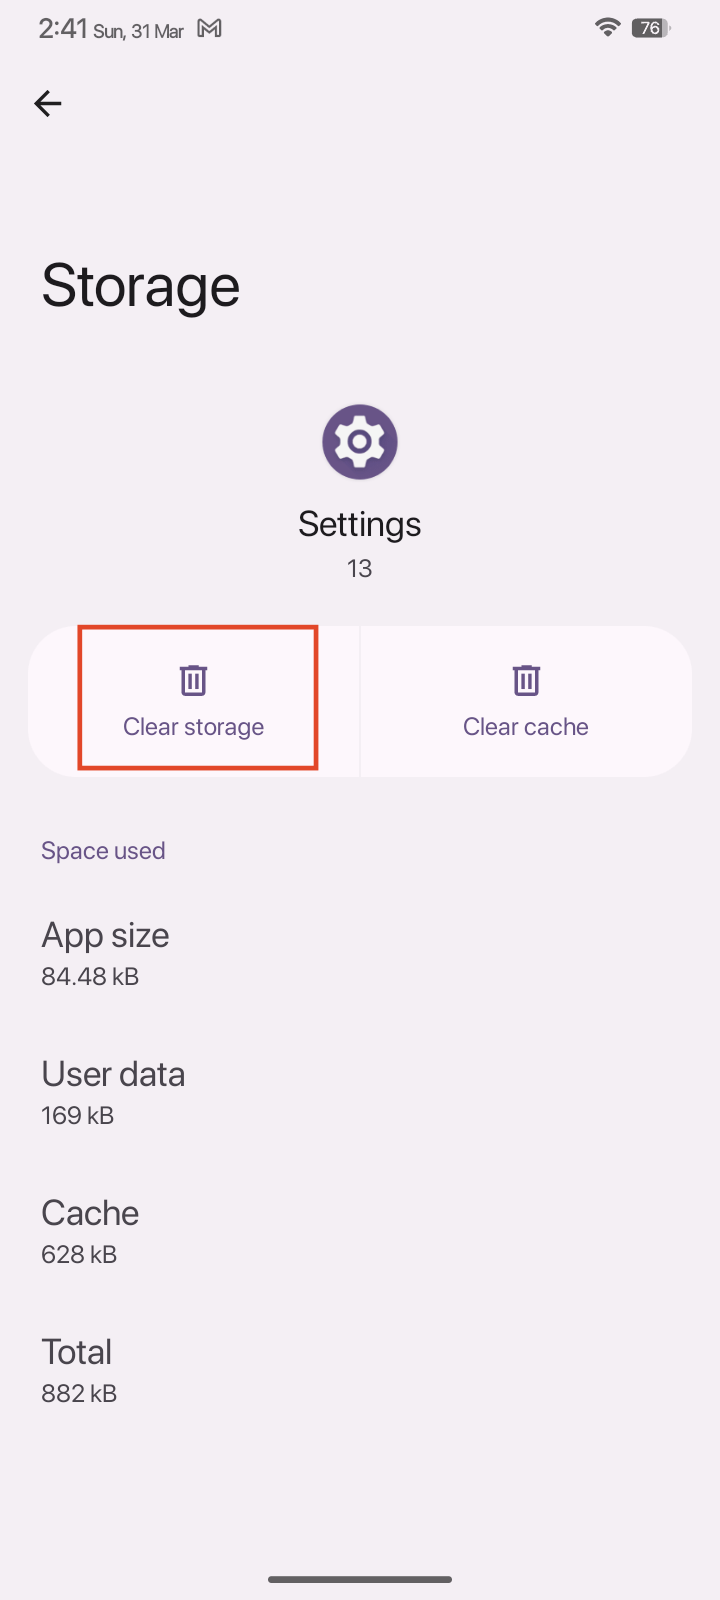 tap on Clear storage for Settings app